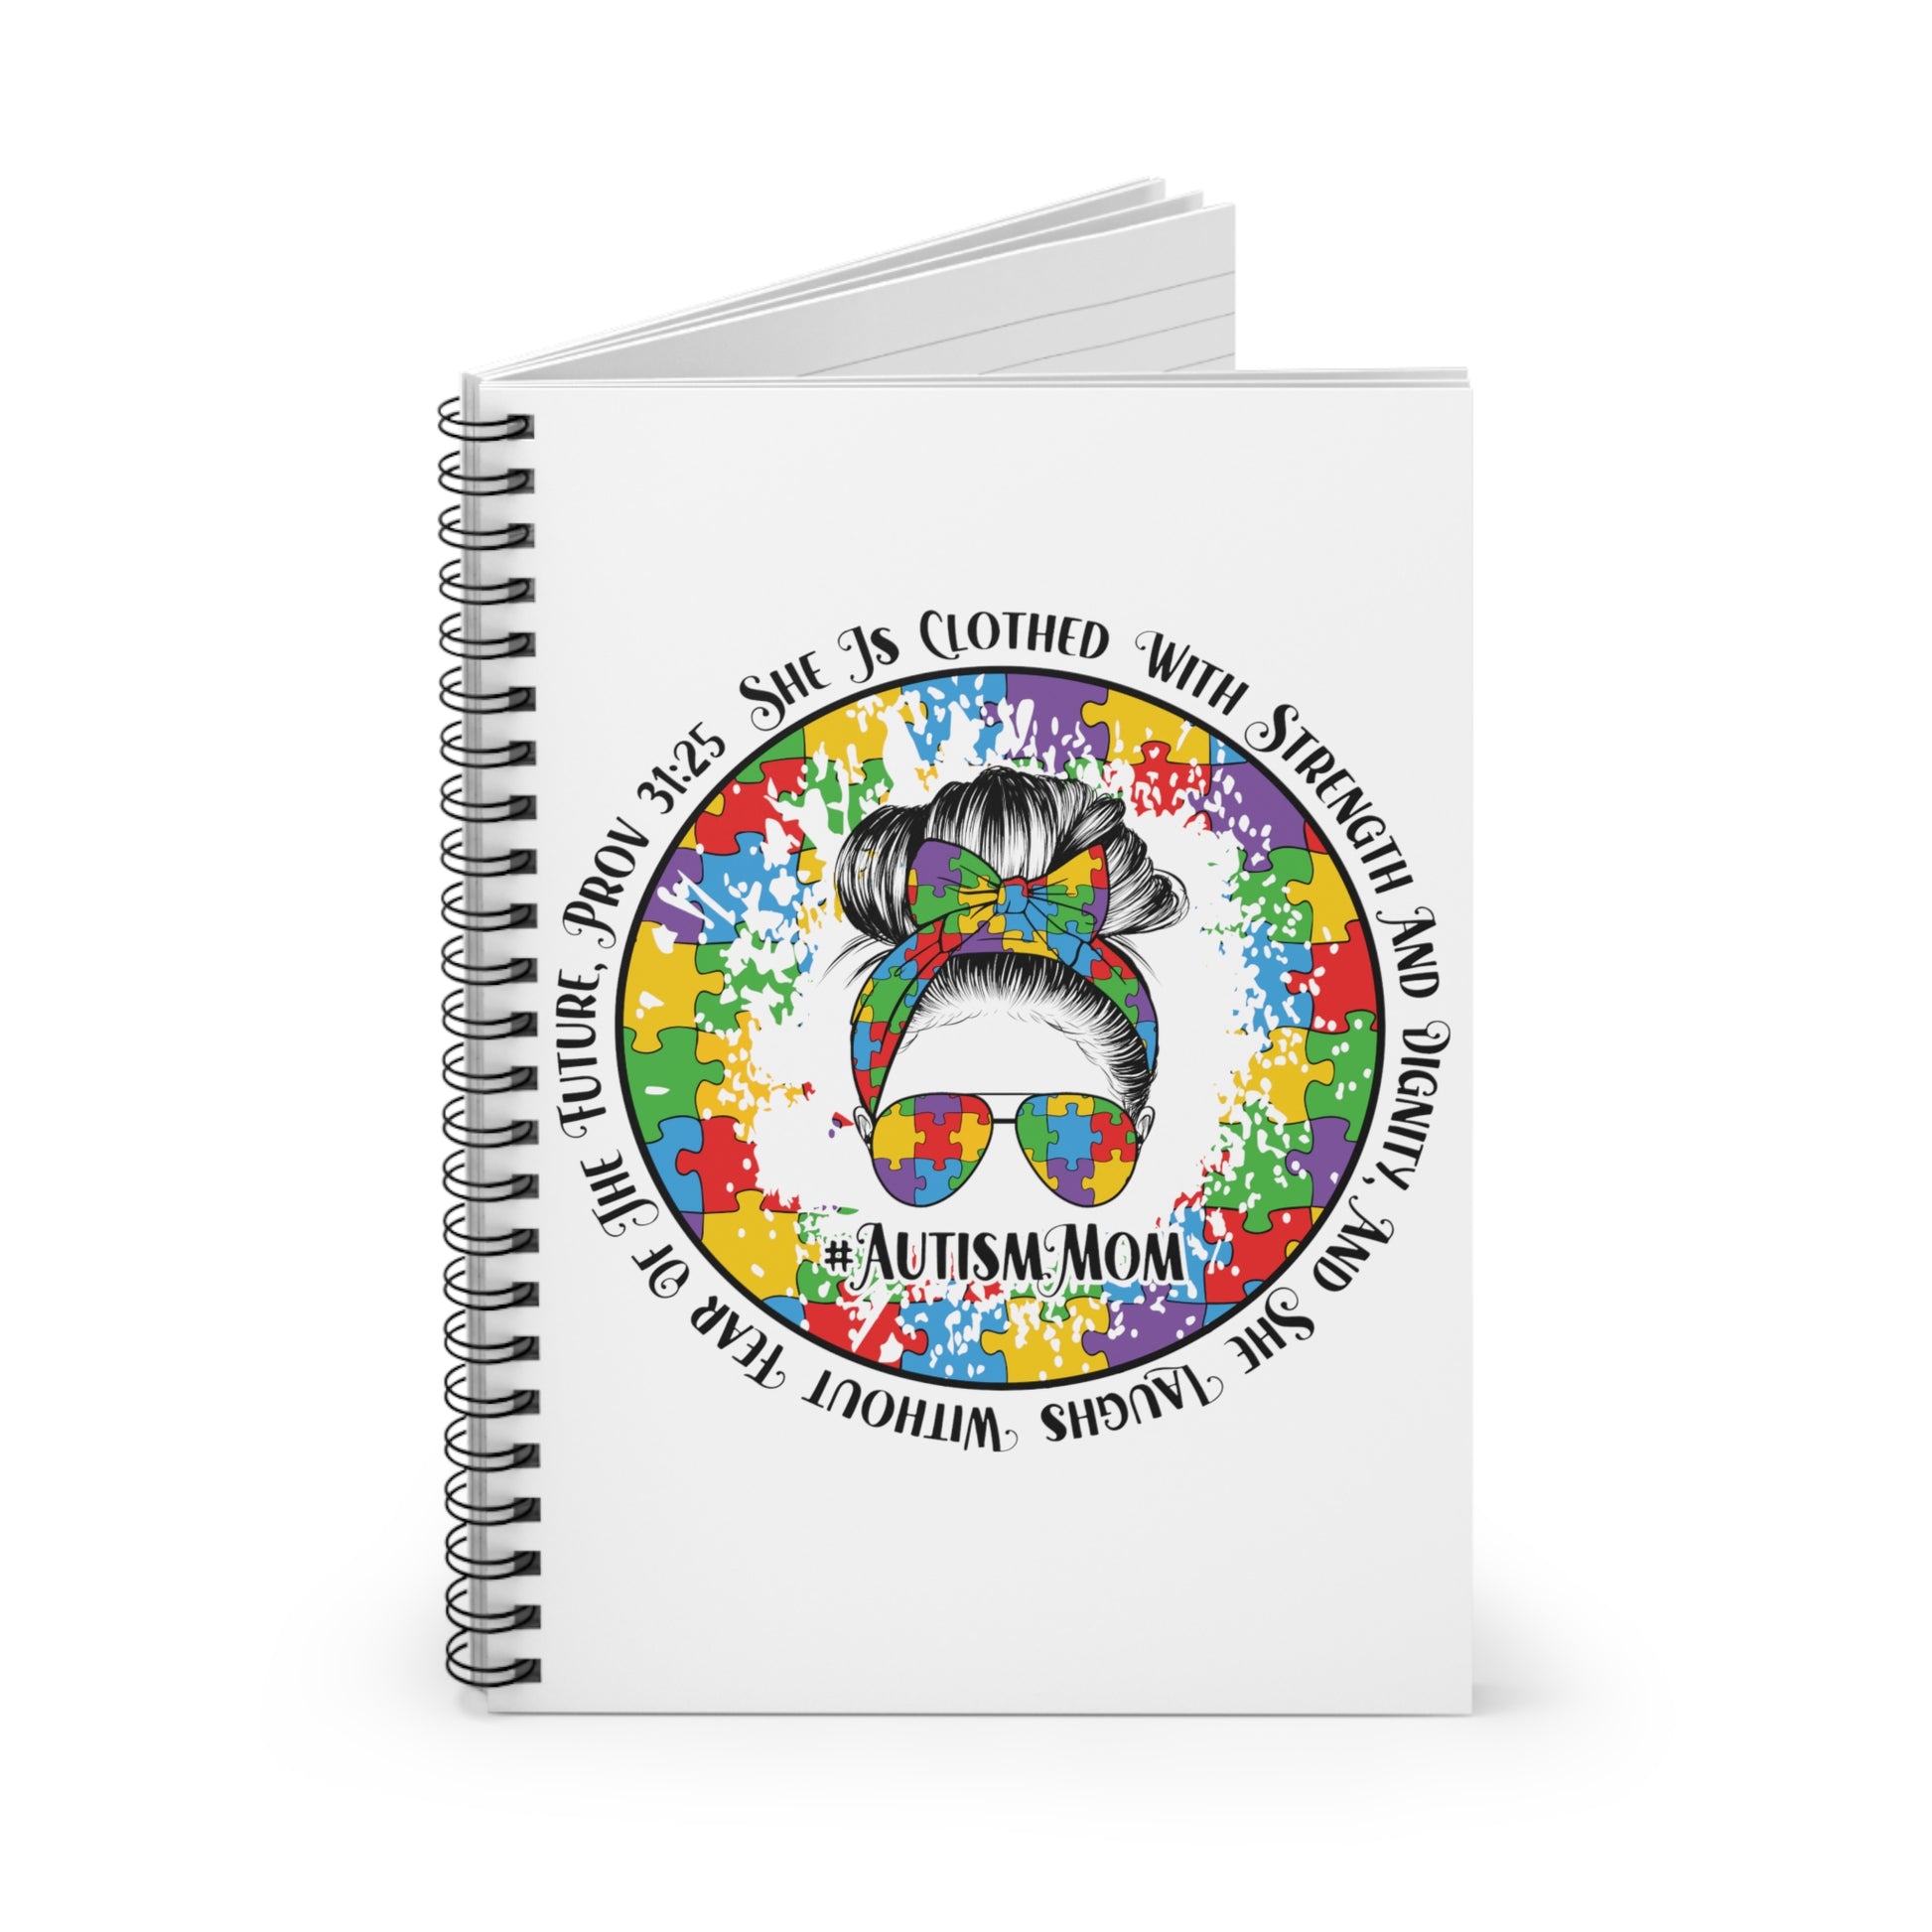 Autism Mom: Spiral Notebook - Log Books - Journals - Diaries - and More Custom Printed by TheGlassyLass